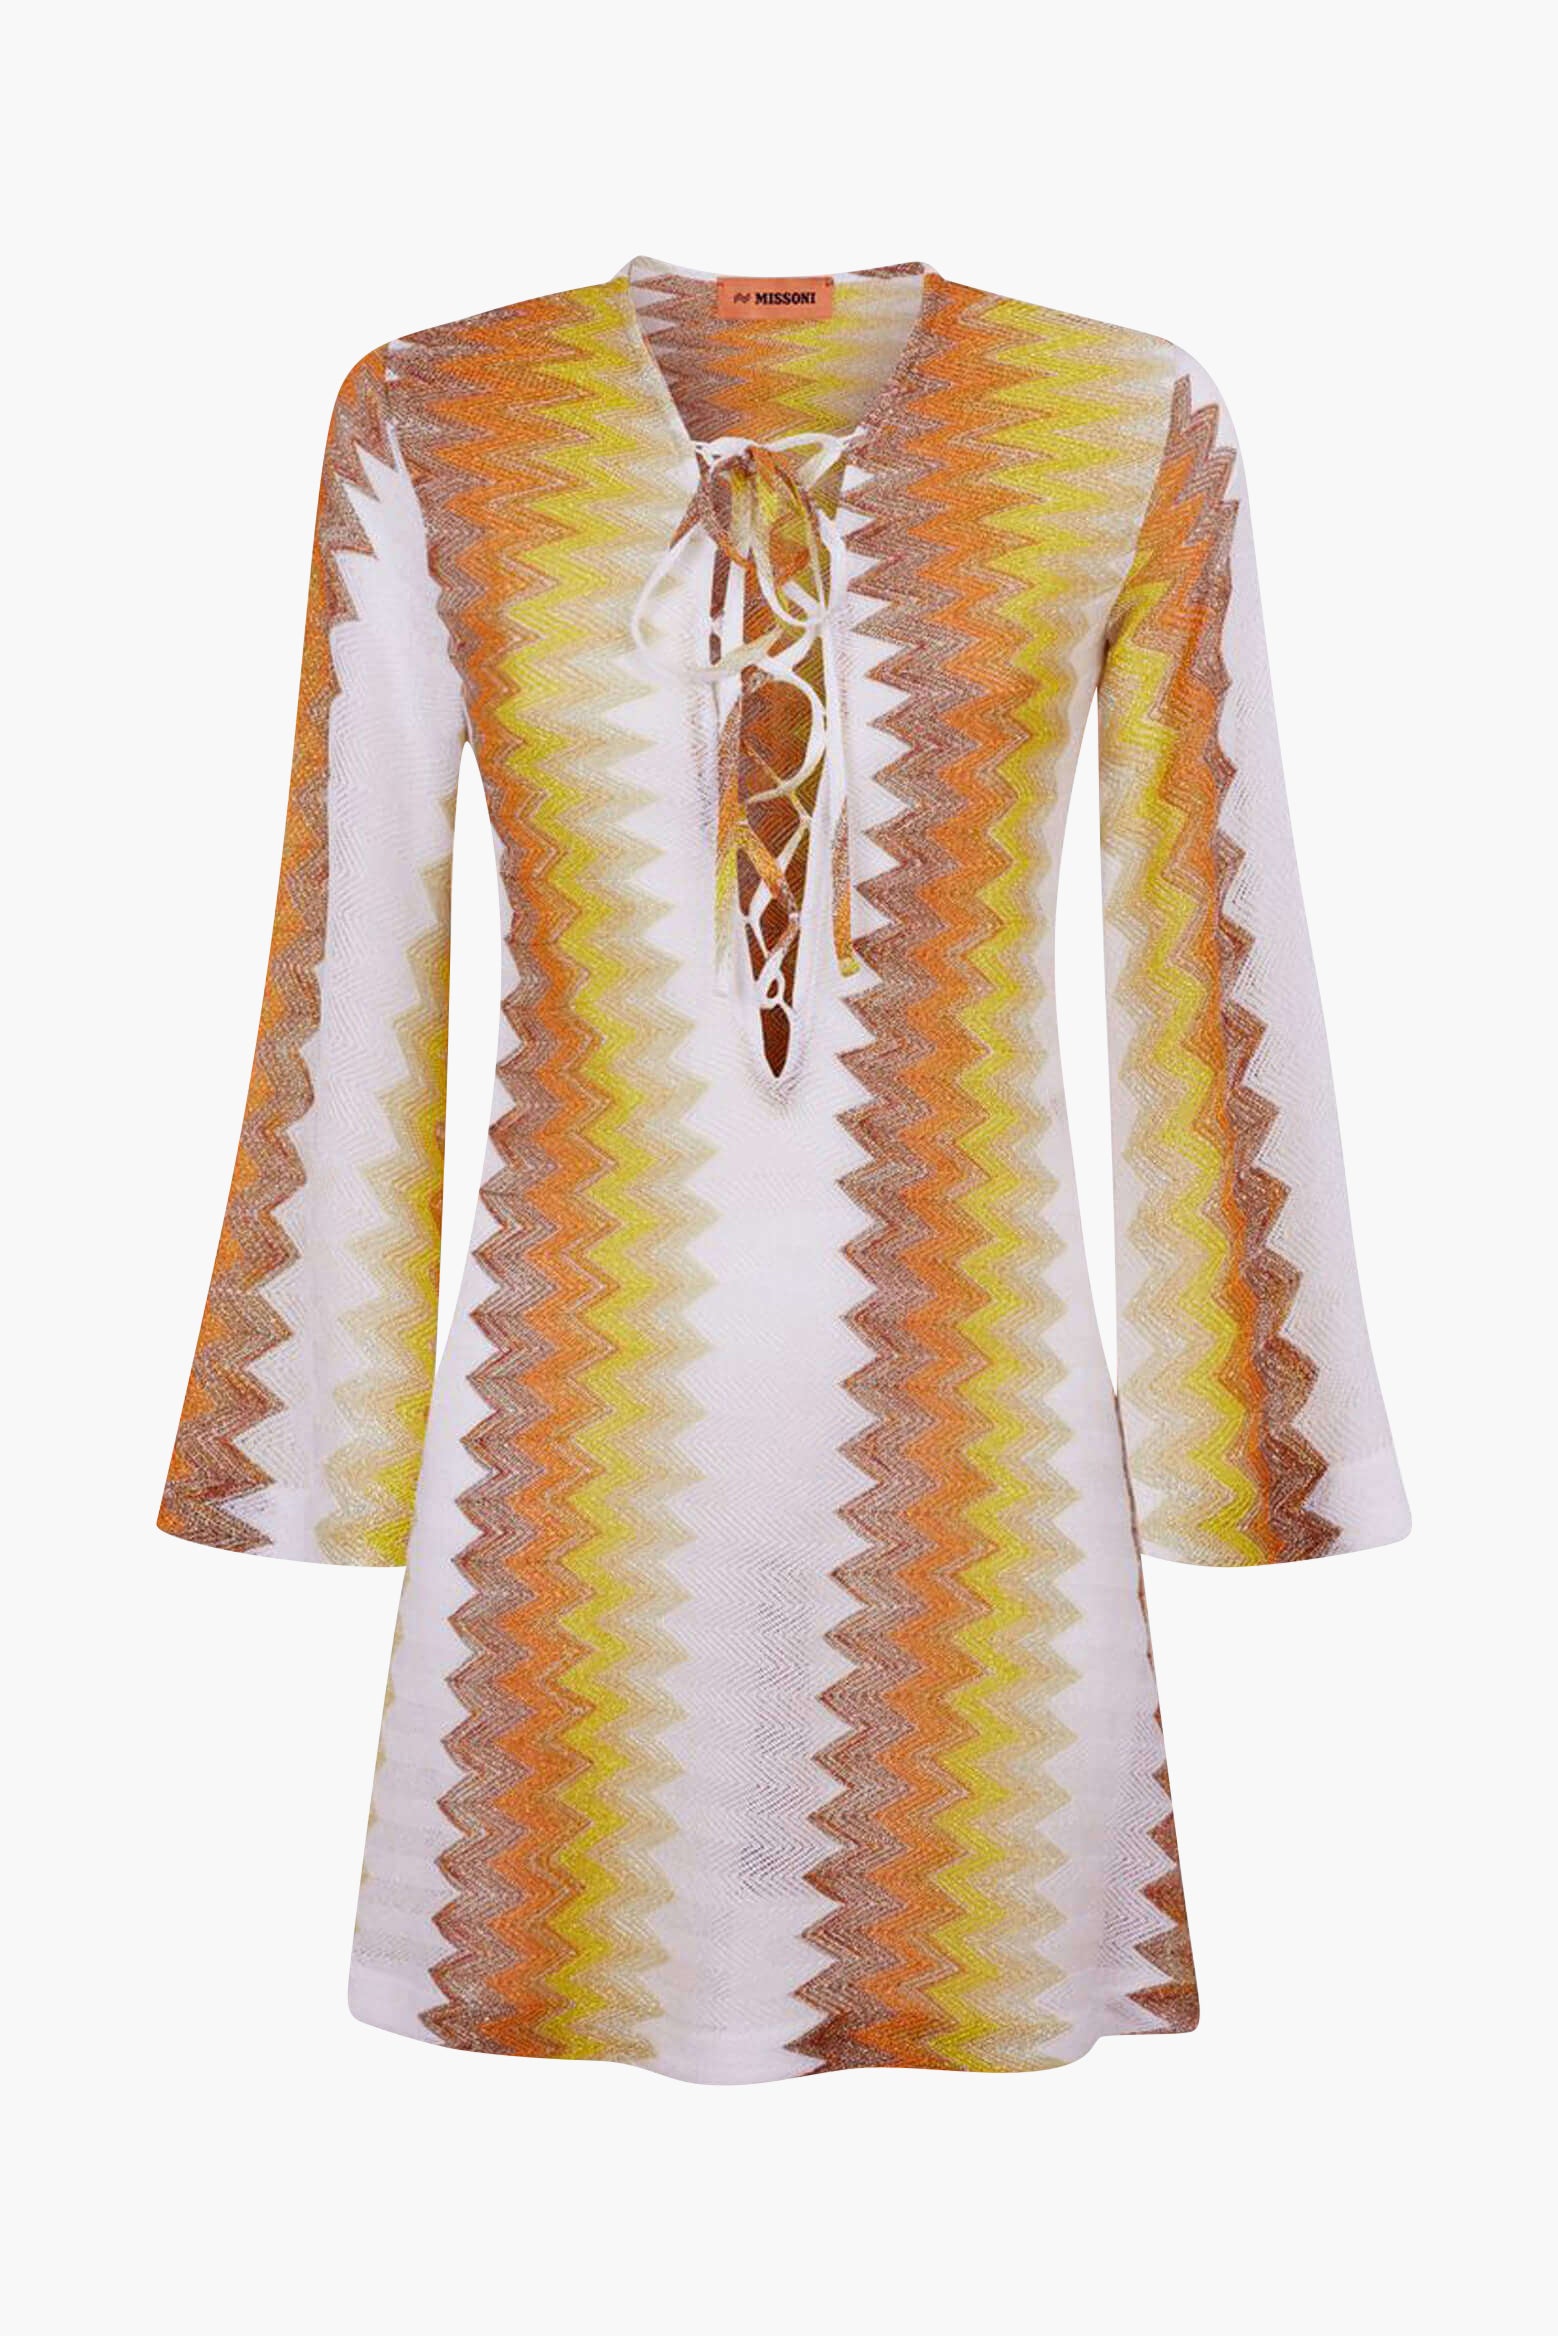 Missoni Mare Zig Zag Kaftan in White/Yellow/Ochre available at TNT The New Trend Australia. Free shipping on orders over $300 AUD.